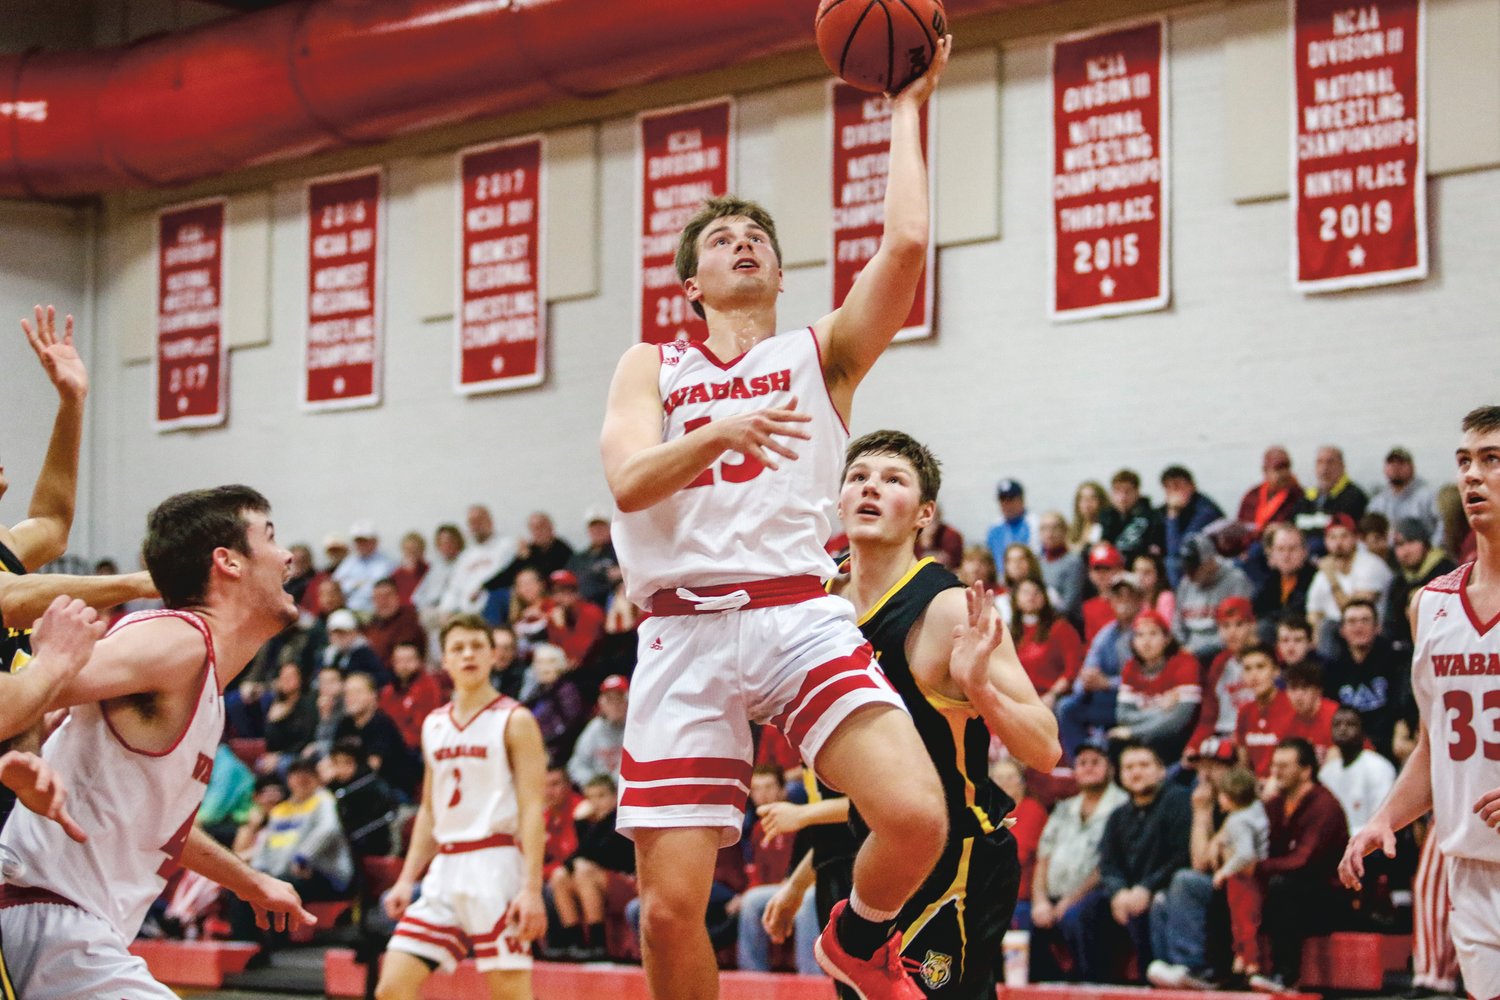 Tyler Watson drives in for a bucket. The sophomore from Tri-West had 13 points in the 71-64 Wabash win over DePauw.